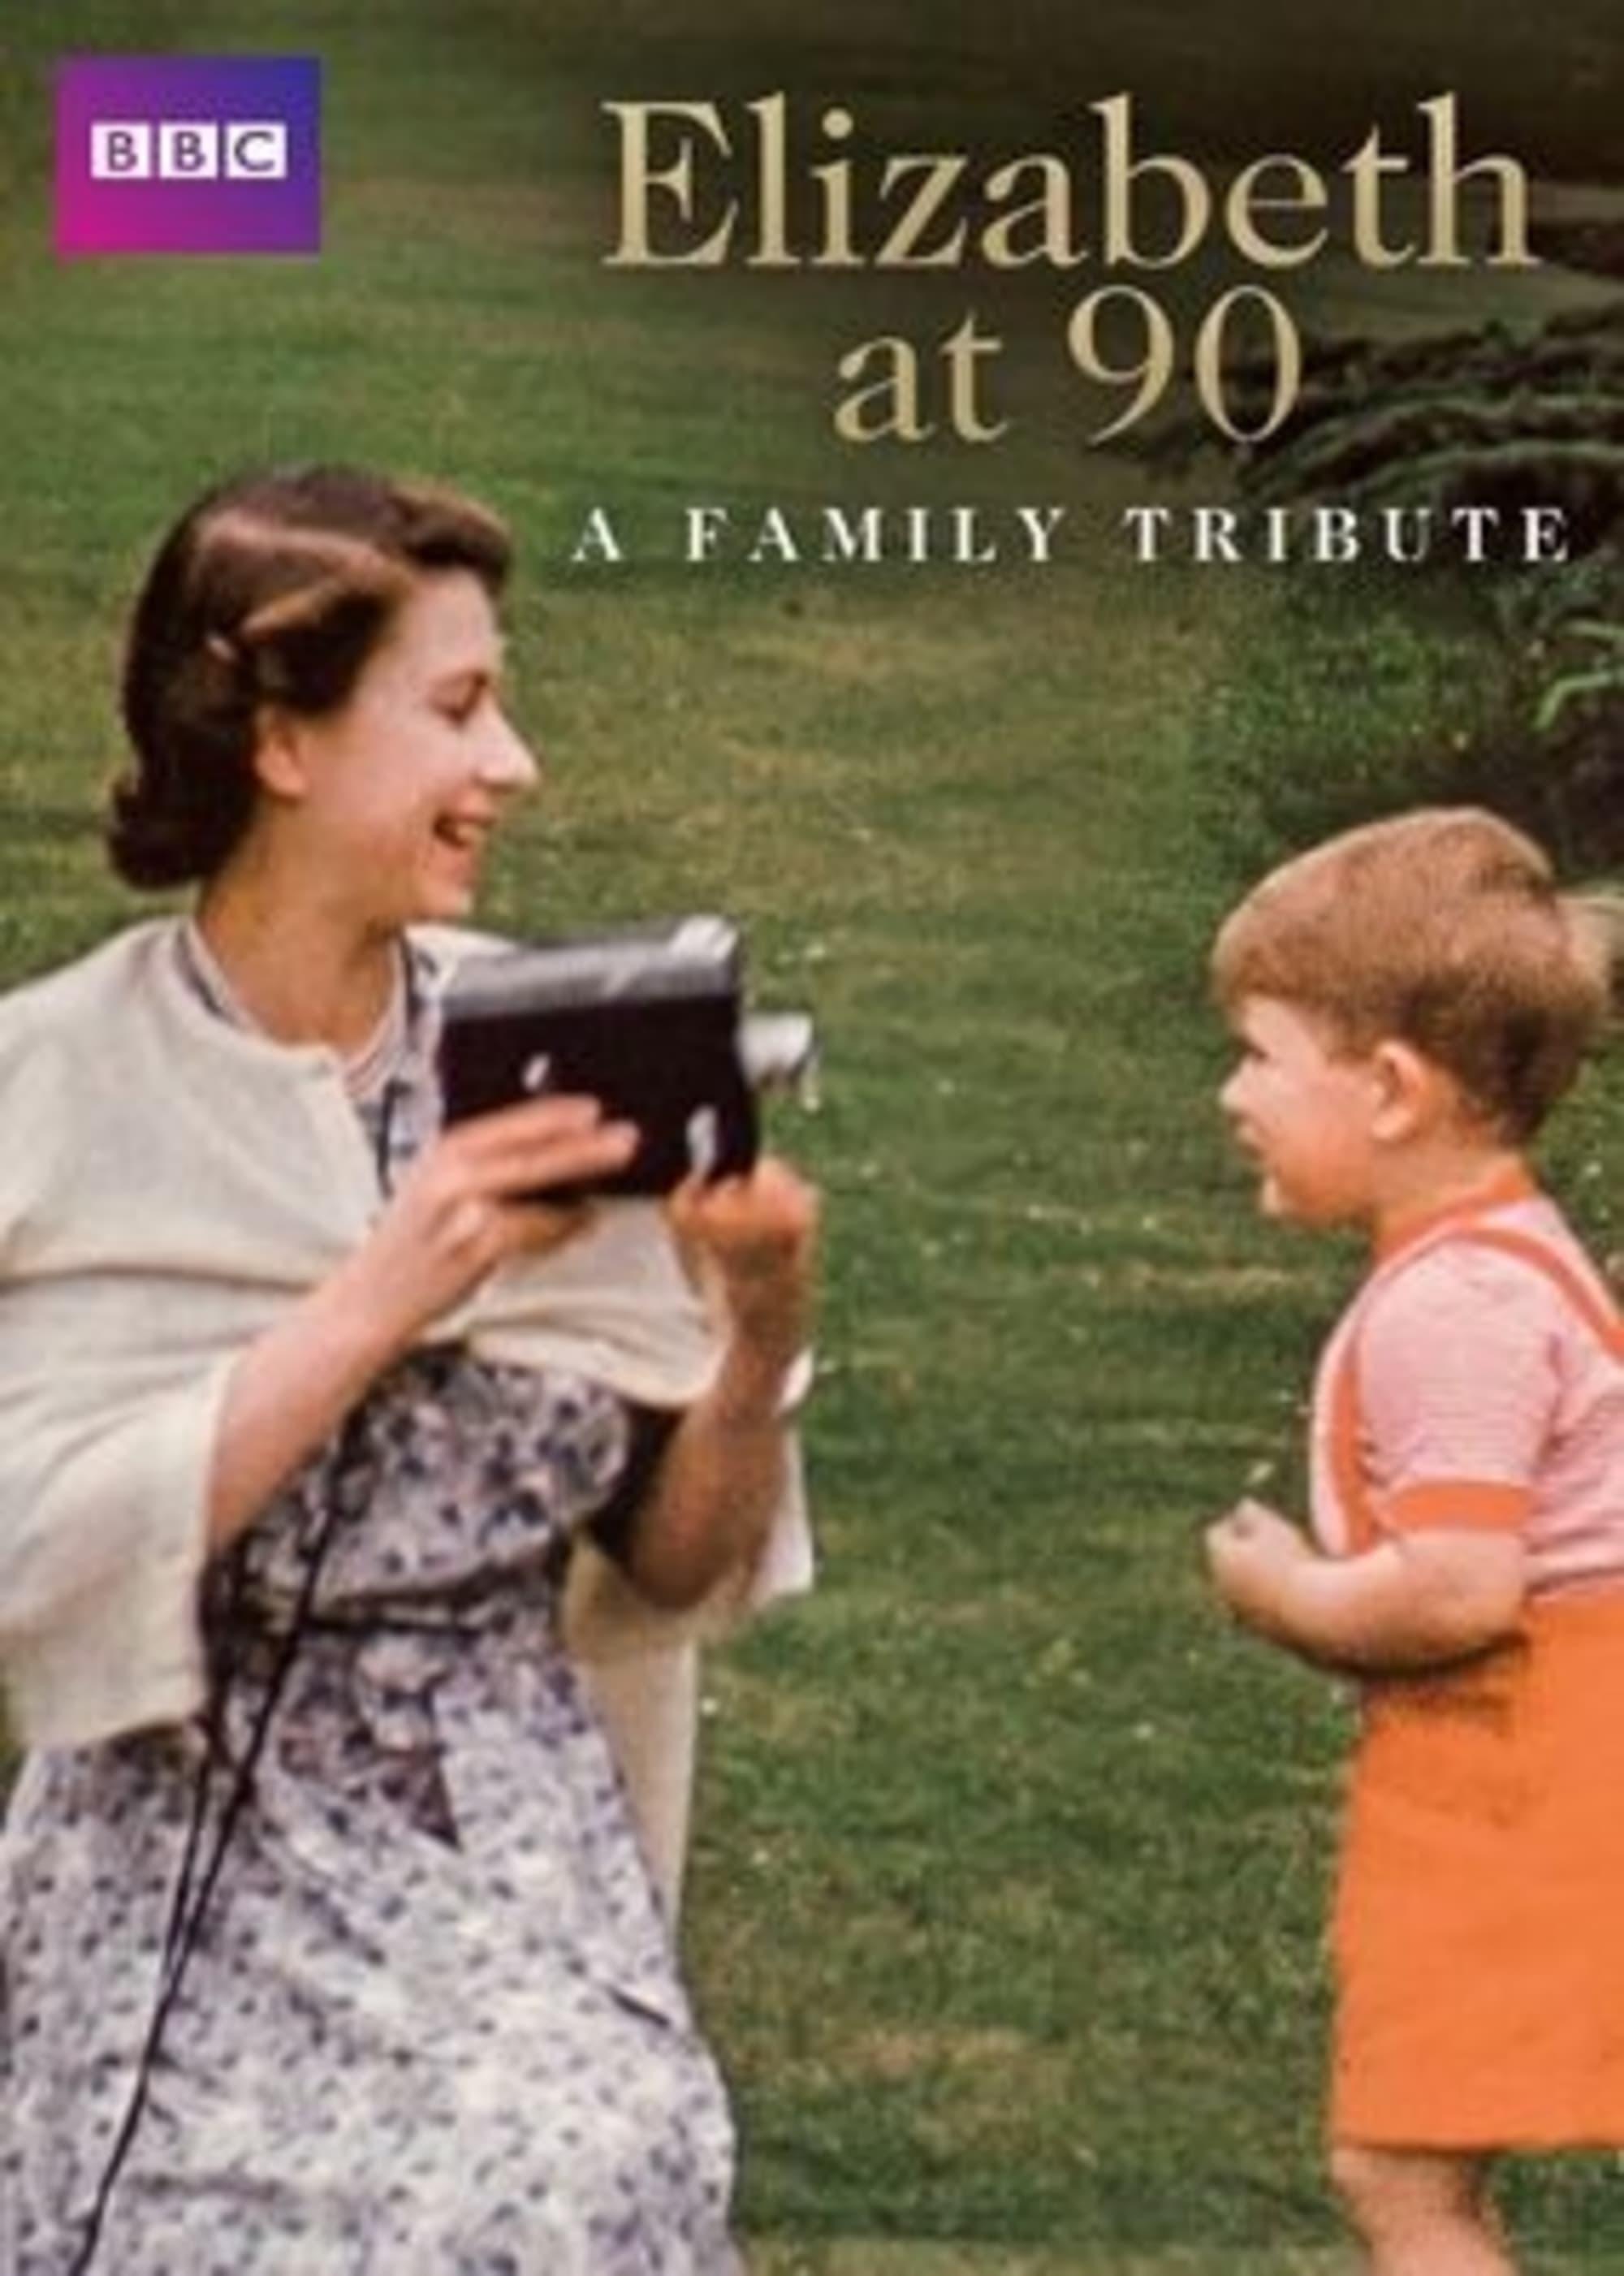 Elizabeth at 90: A Family Tribute poster